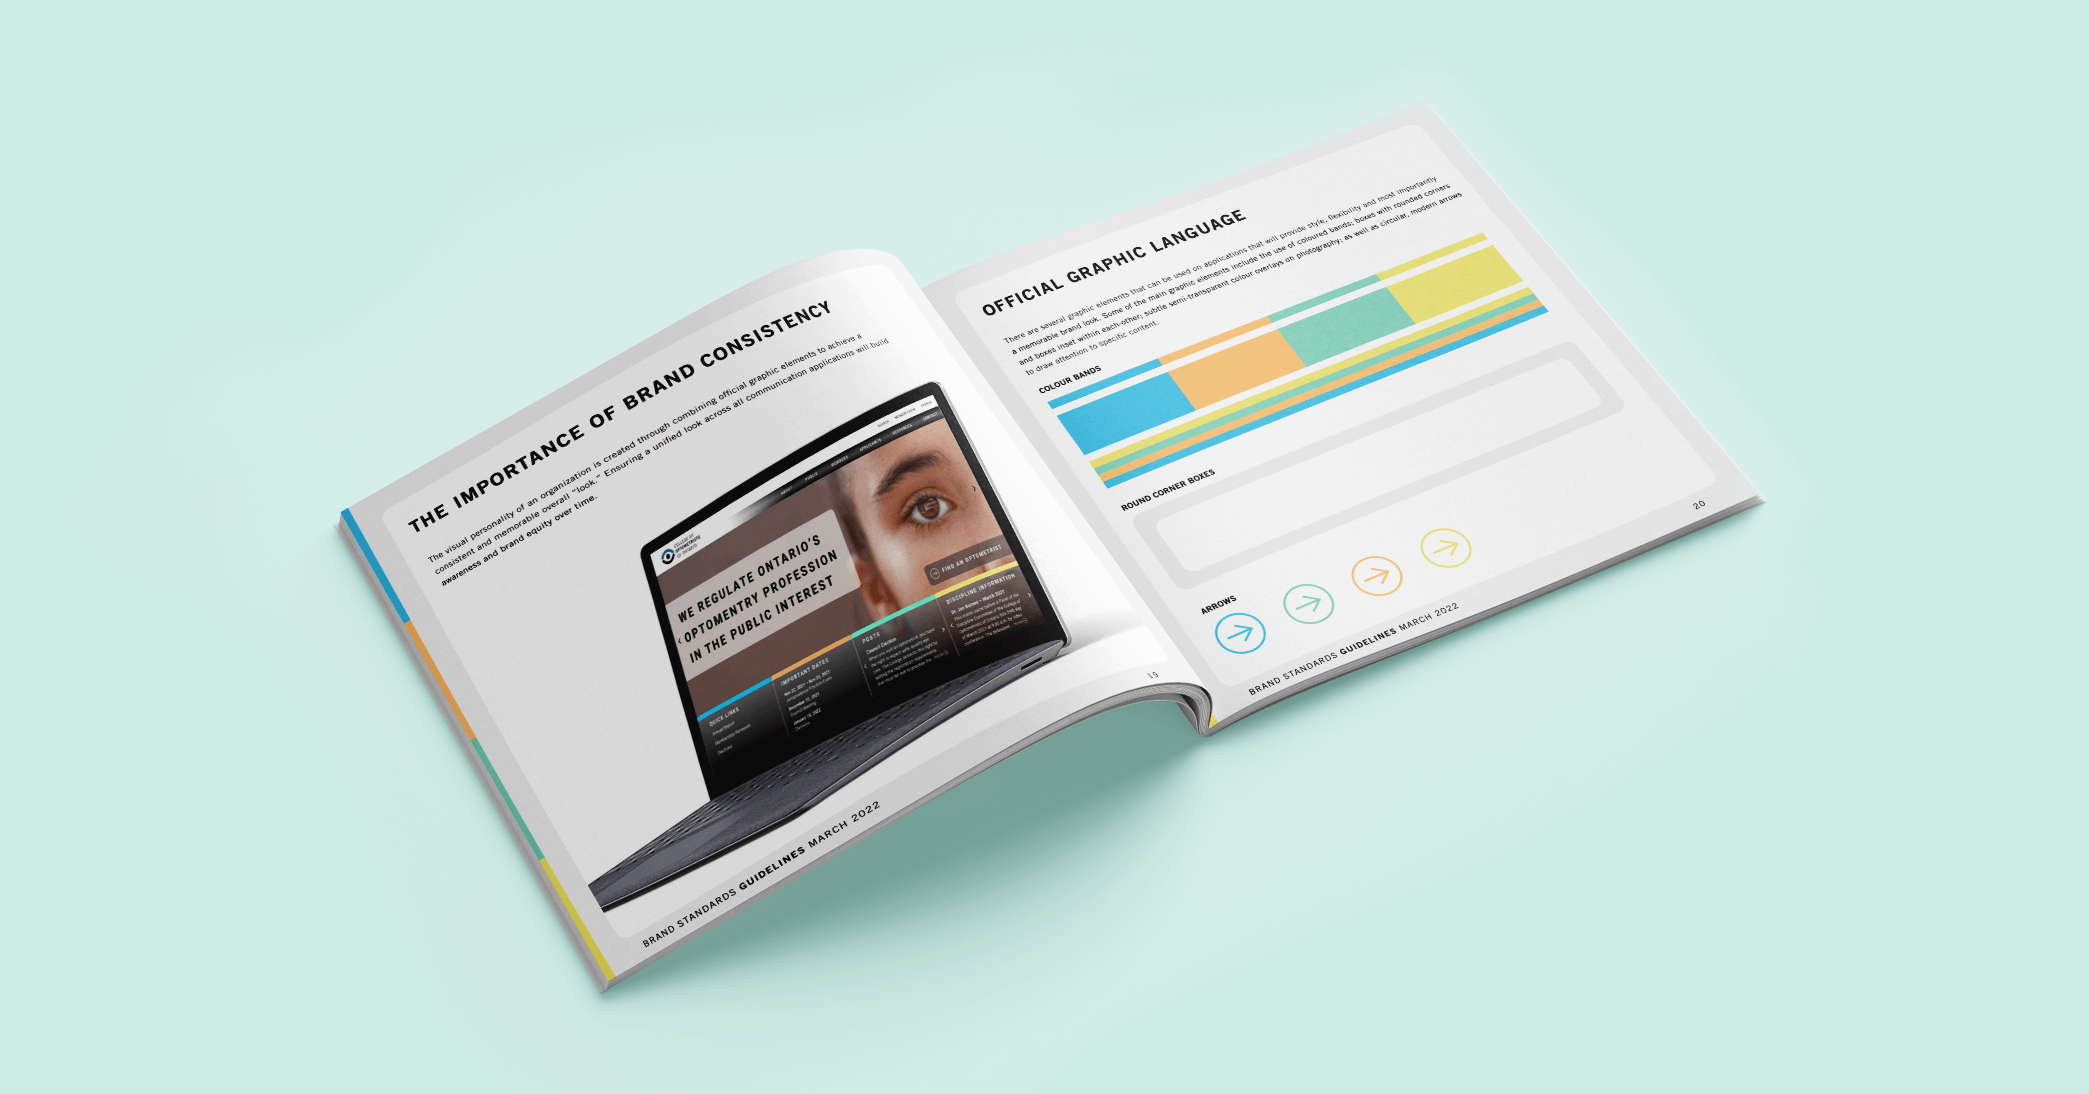 Graphic language of the brand standards guide design for the College of Optometrist of Ontario.